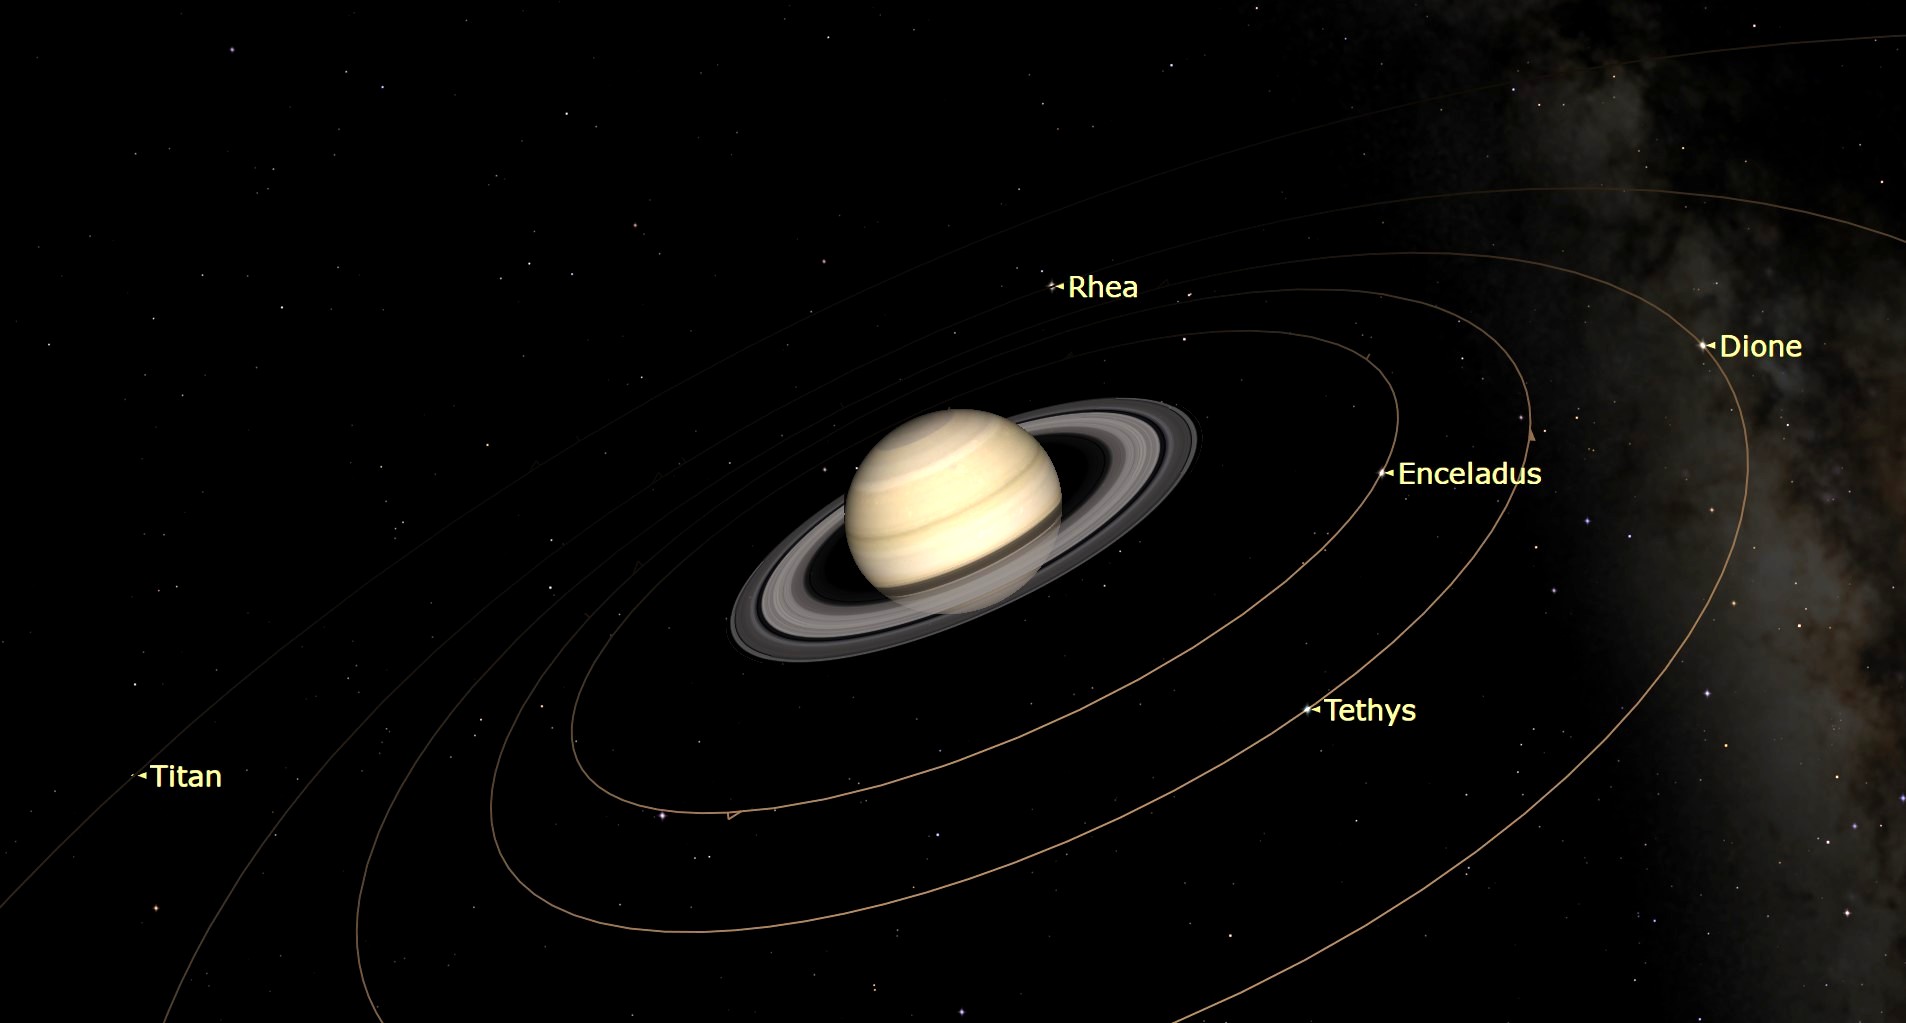 Graphic showing Saturn being orbiting by Titan, Rhea, Enceladus, Tethys and Dione.